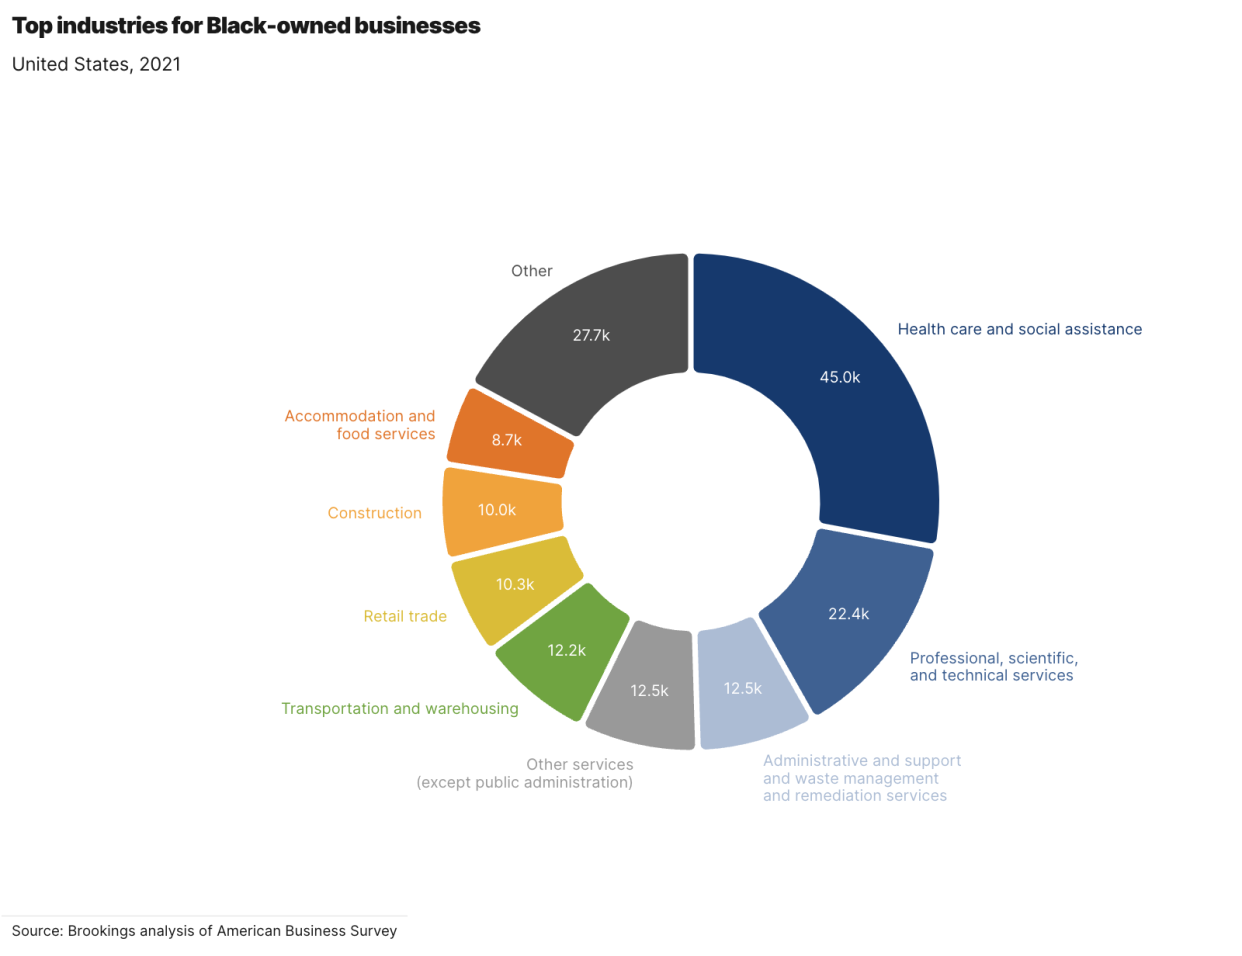 Top industries for Black-owned businesses in the US. Source: Brookings Institute